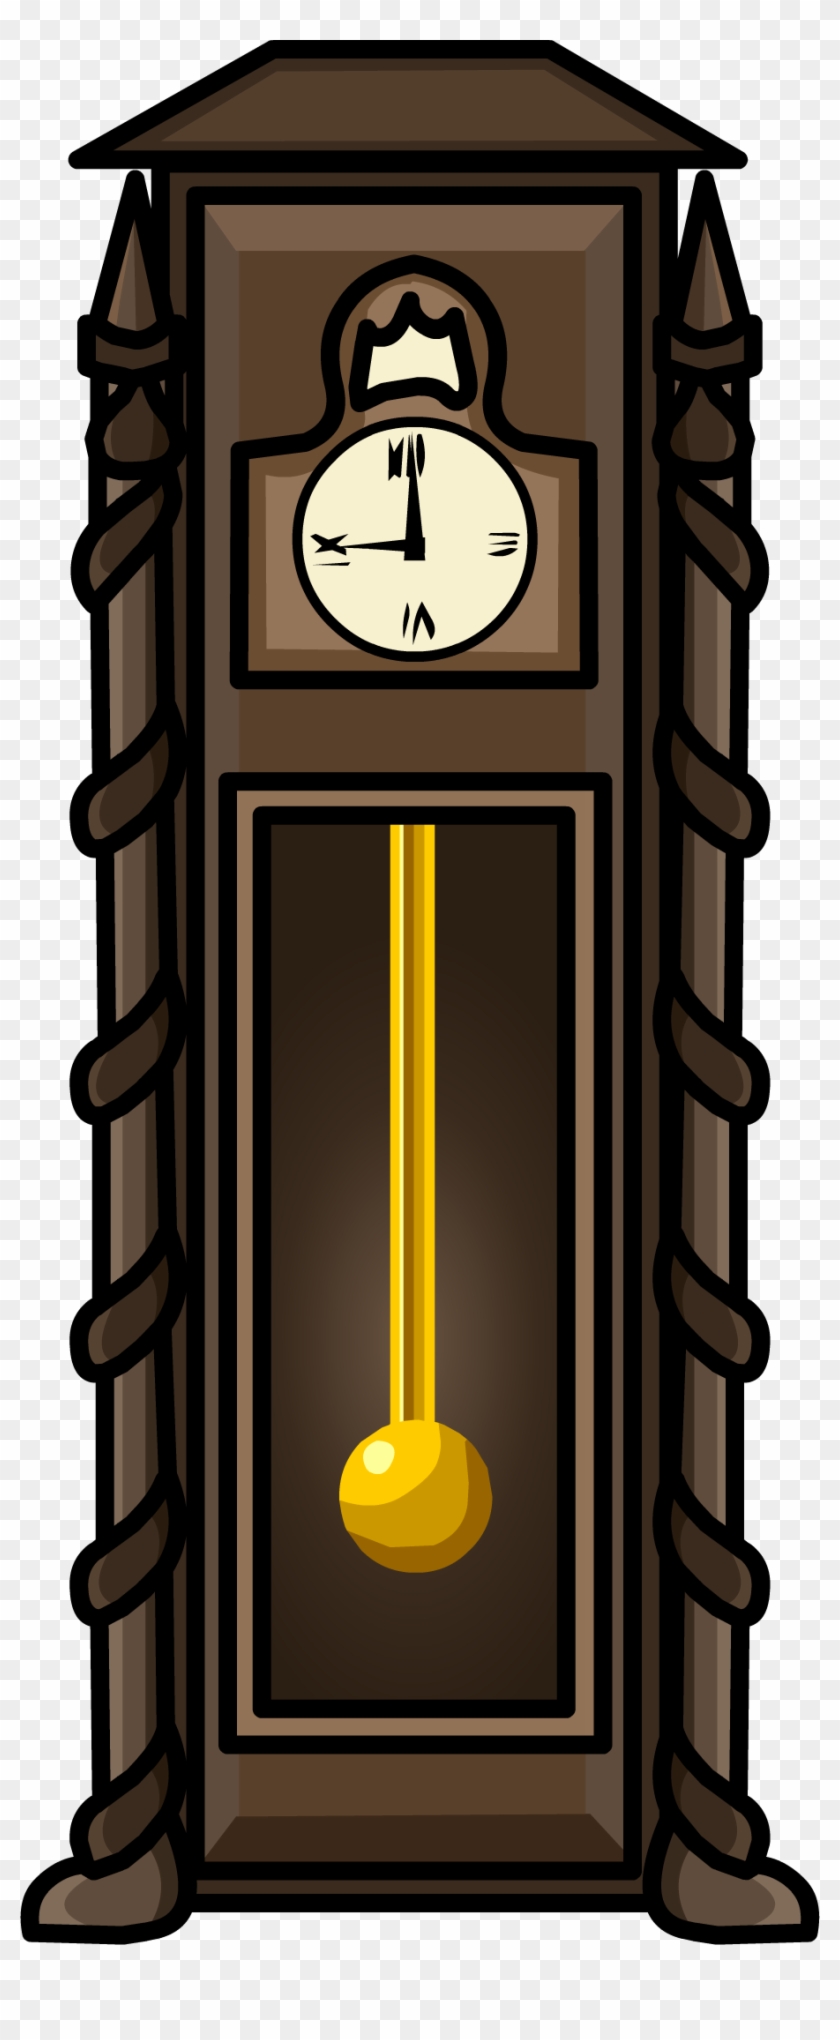 Free Png Download Club Penguin Clock Png Images Background - Club Penguin Party Furniture Ids Clipart #1836136